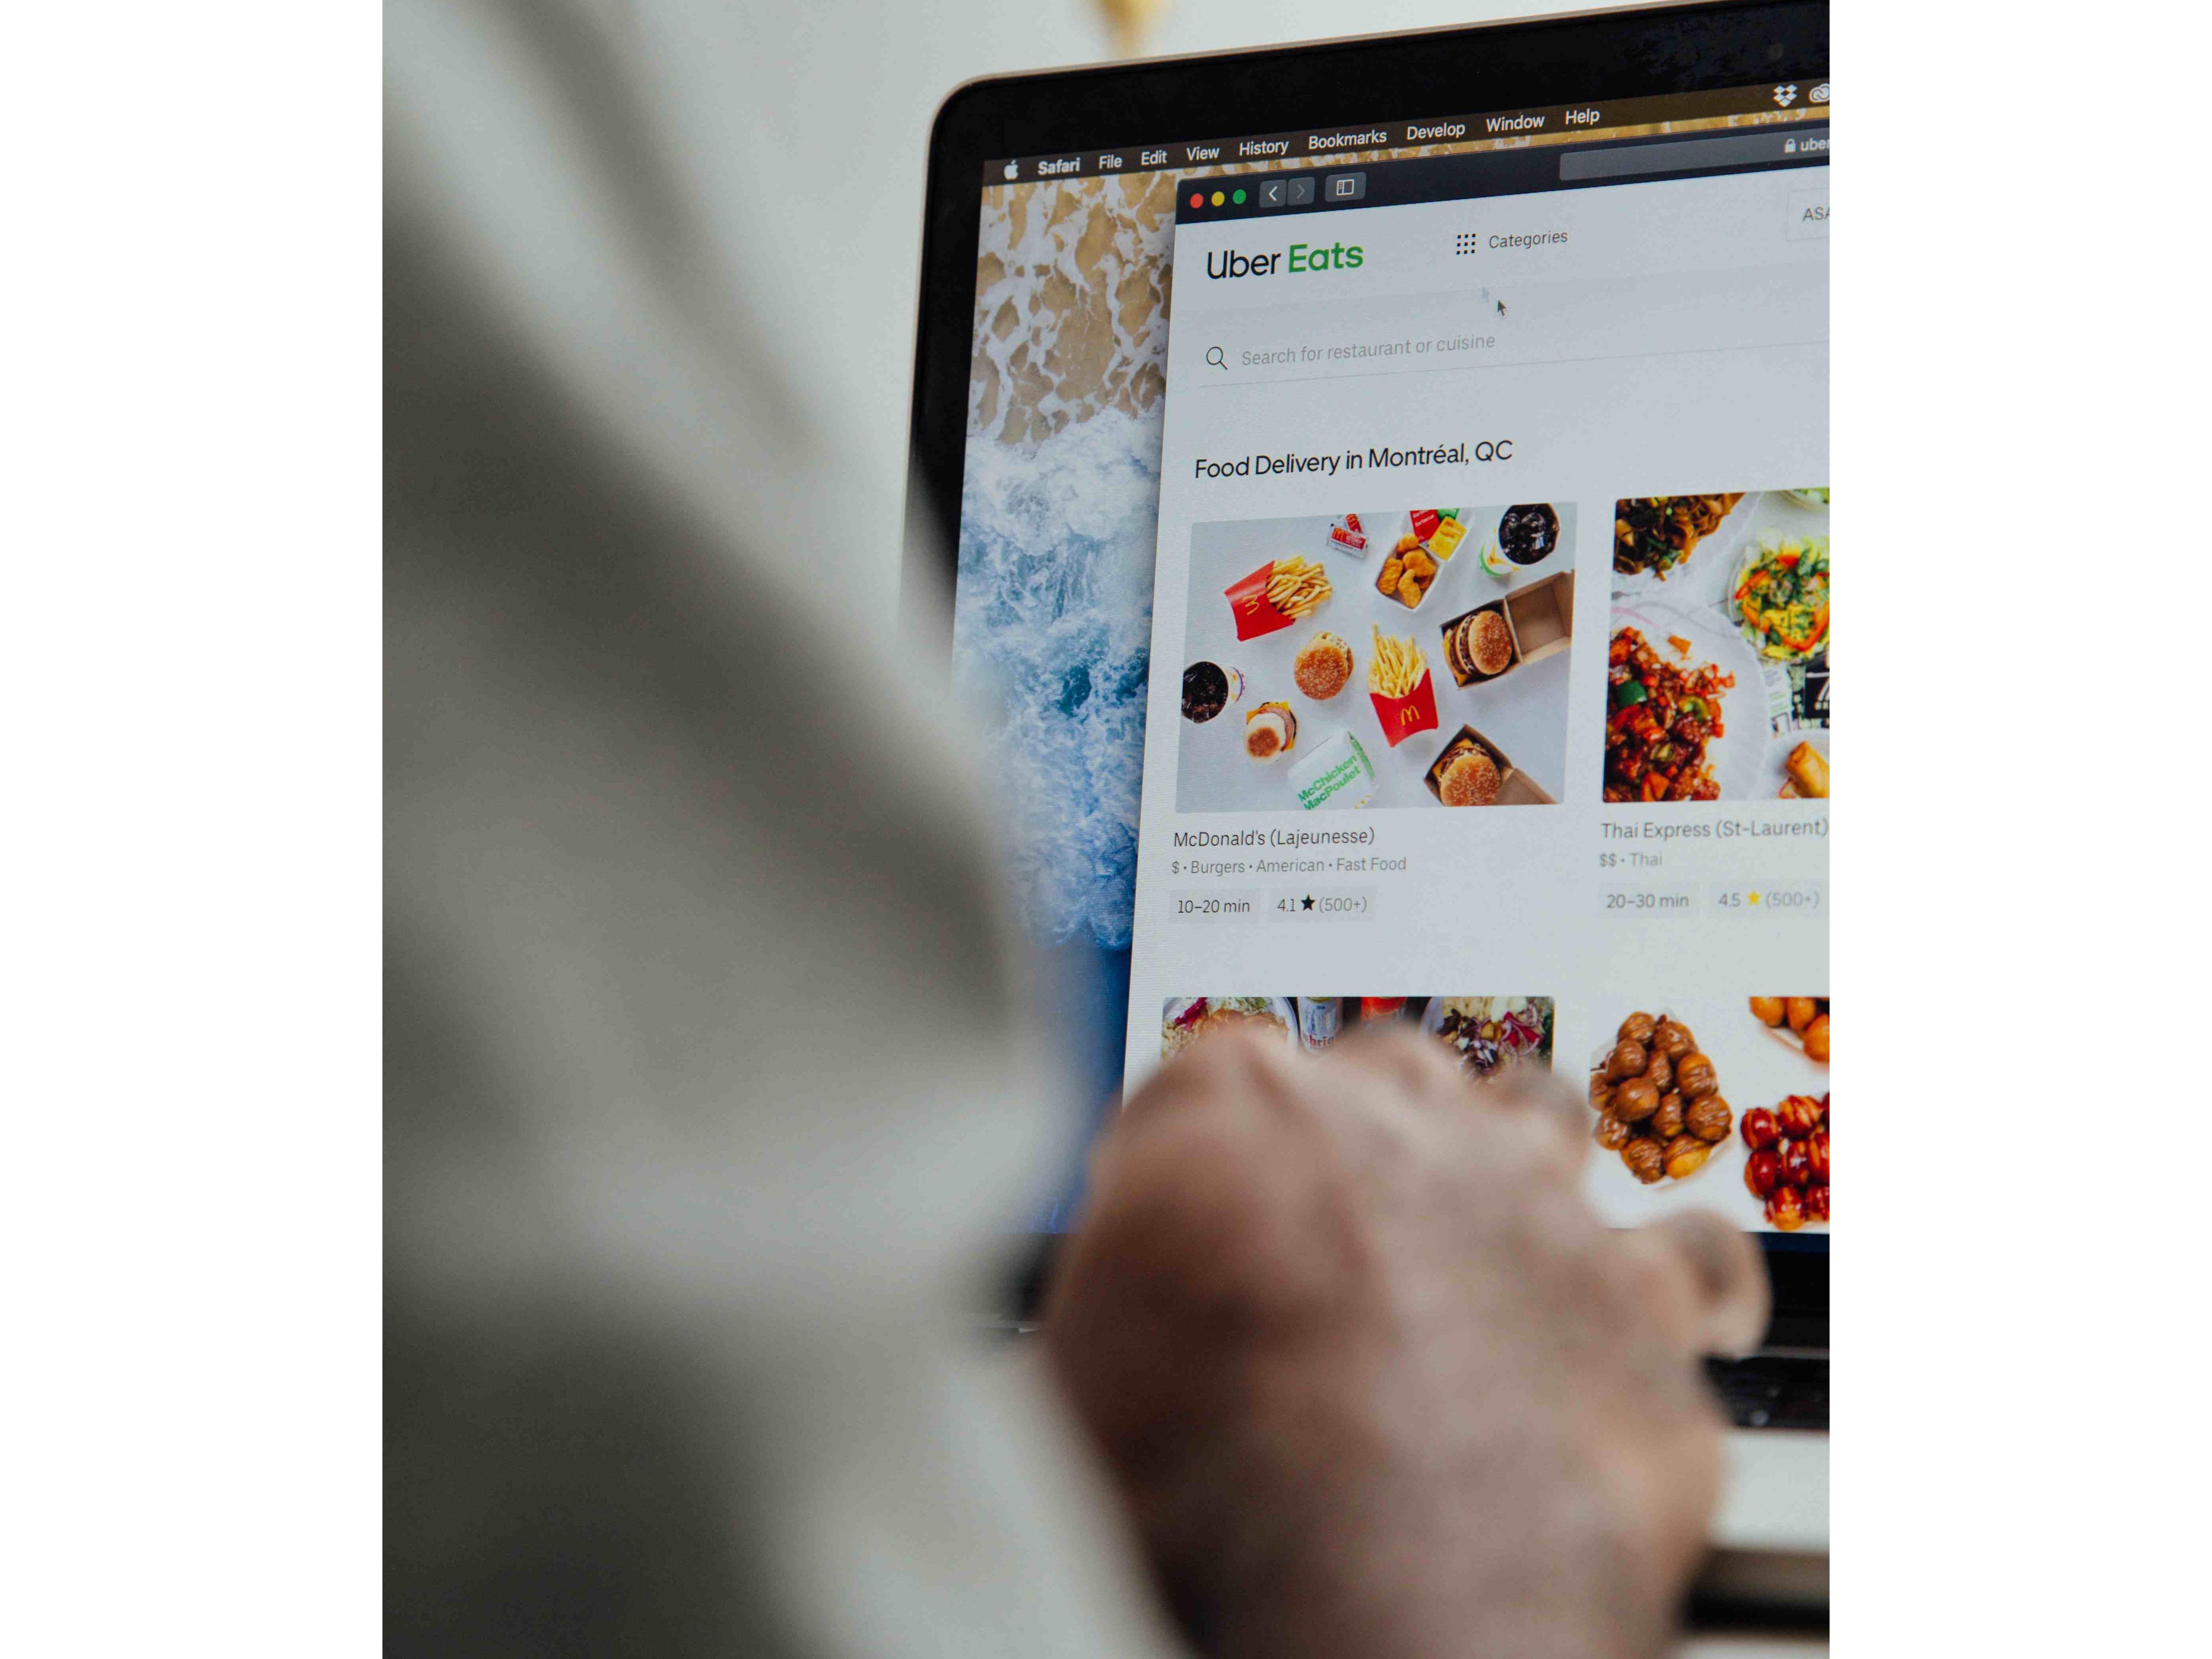 The online food delivery industry continues growing